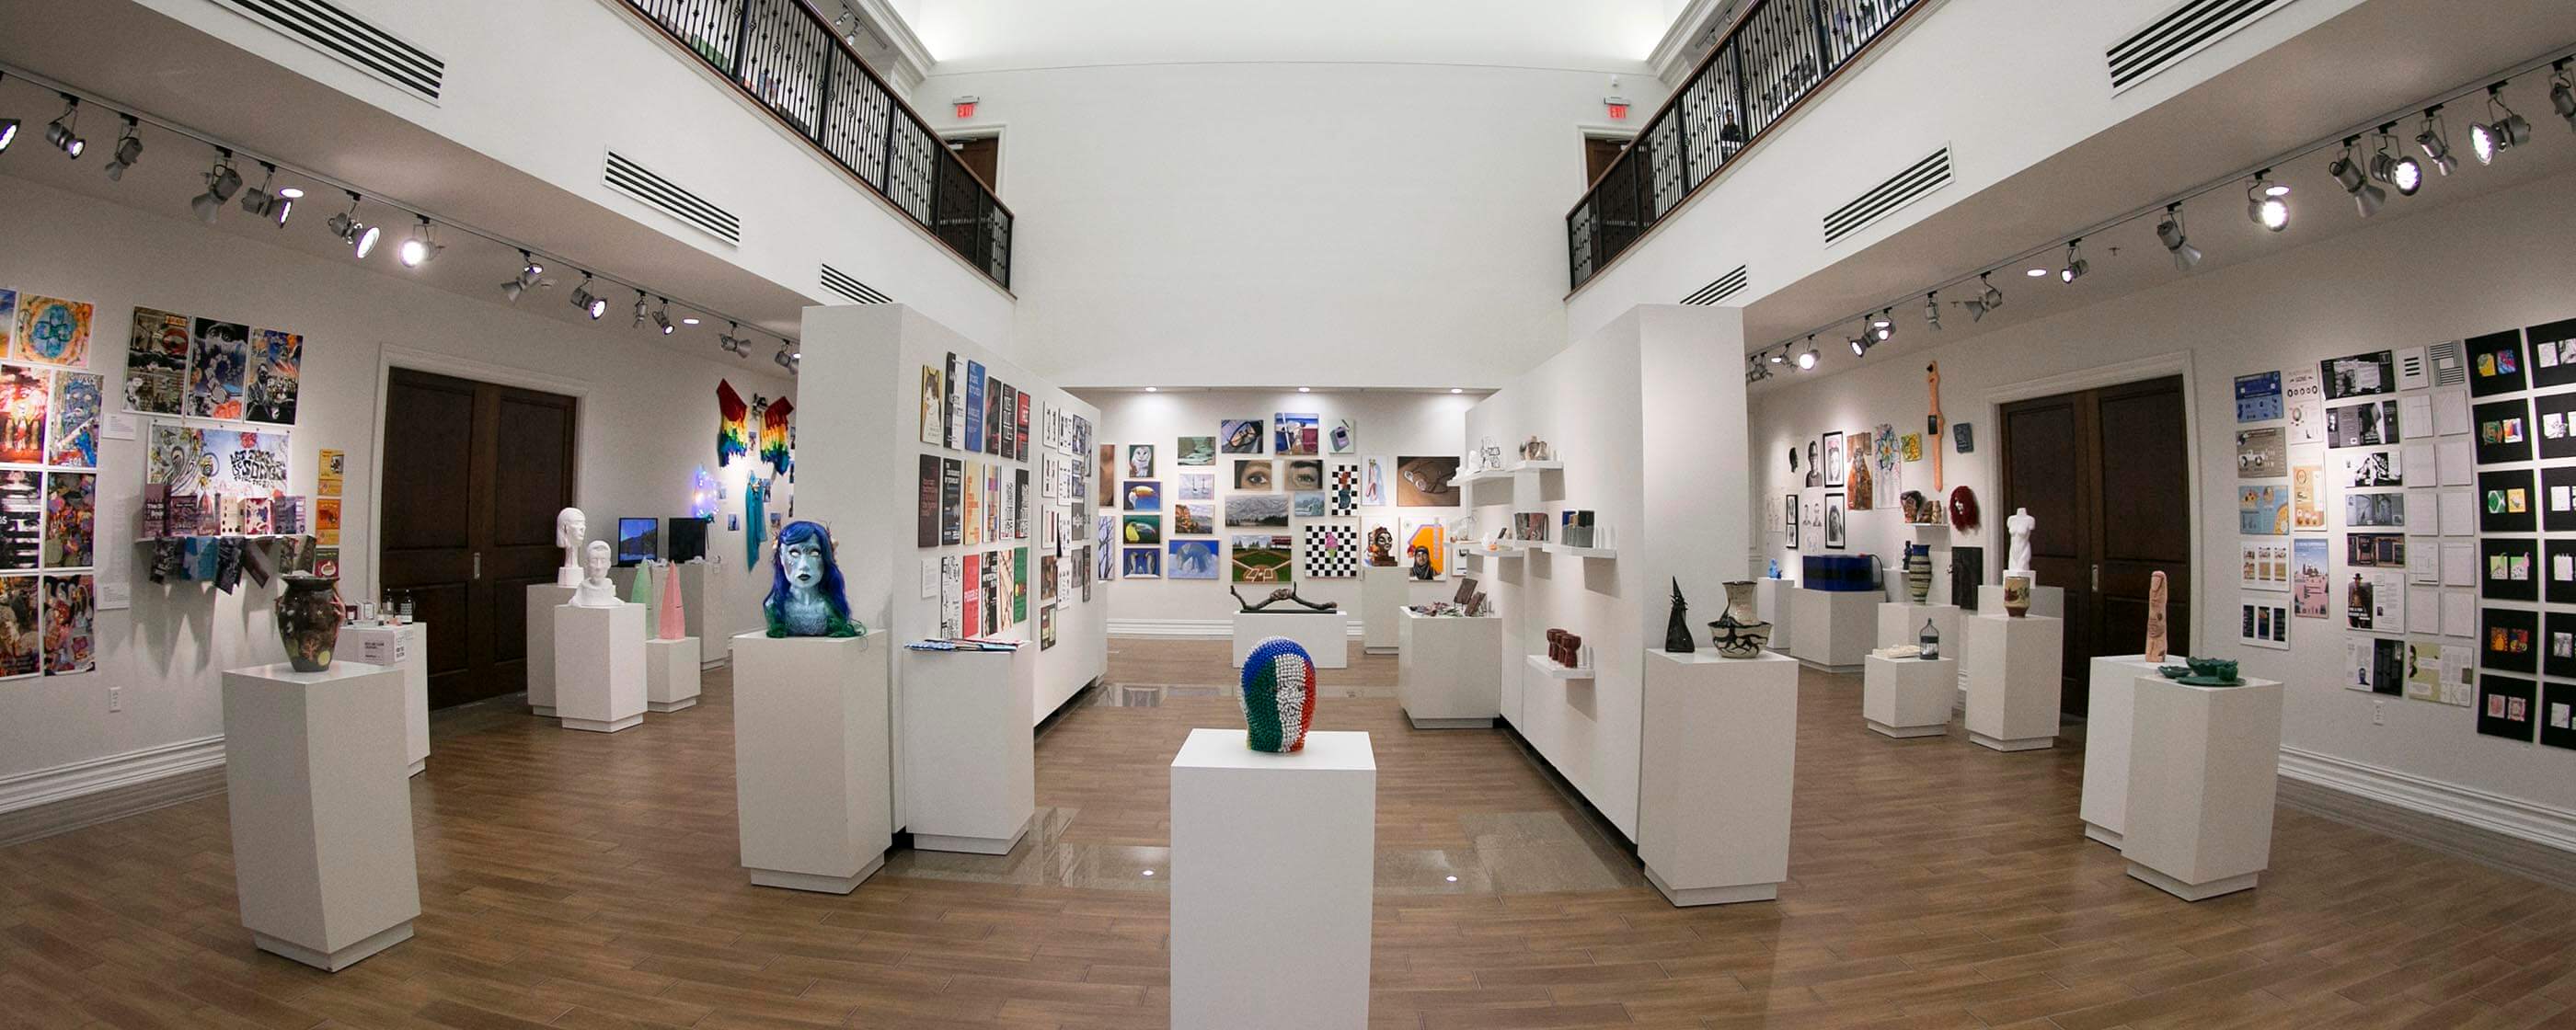 Photo shows art exhibition in gallery